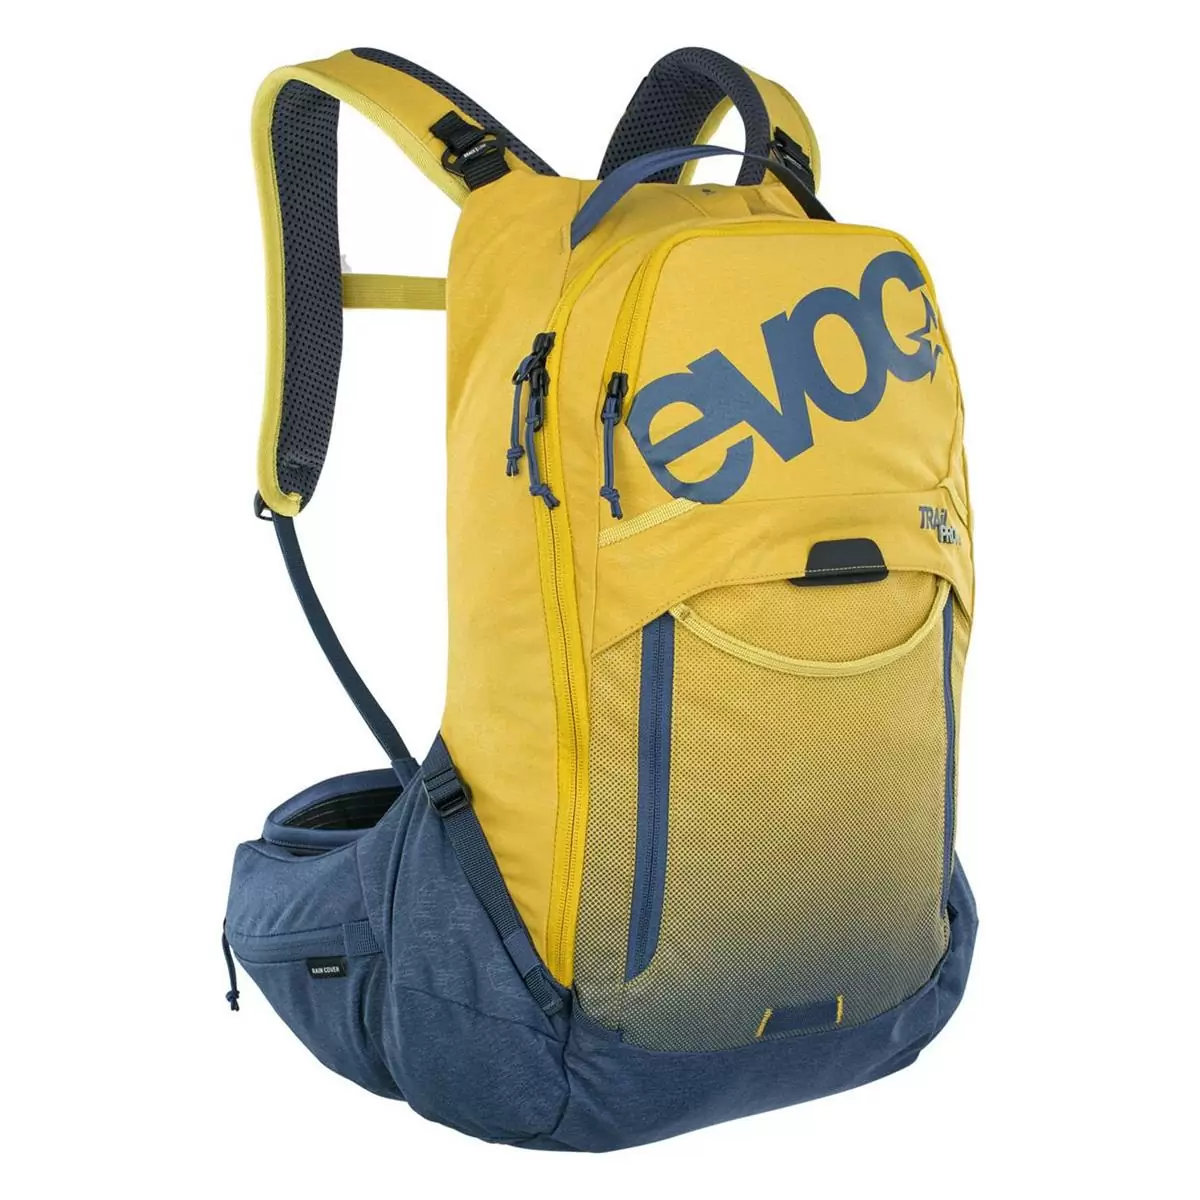 Backpack Trail Pro 16 litri Curry - Denim size S/M - image